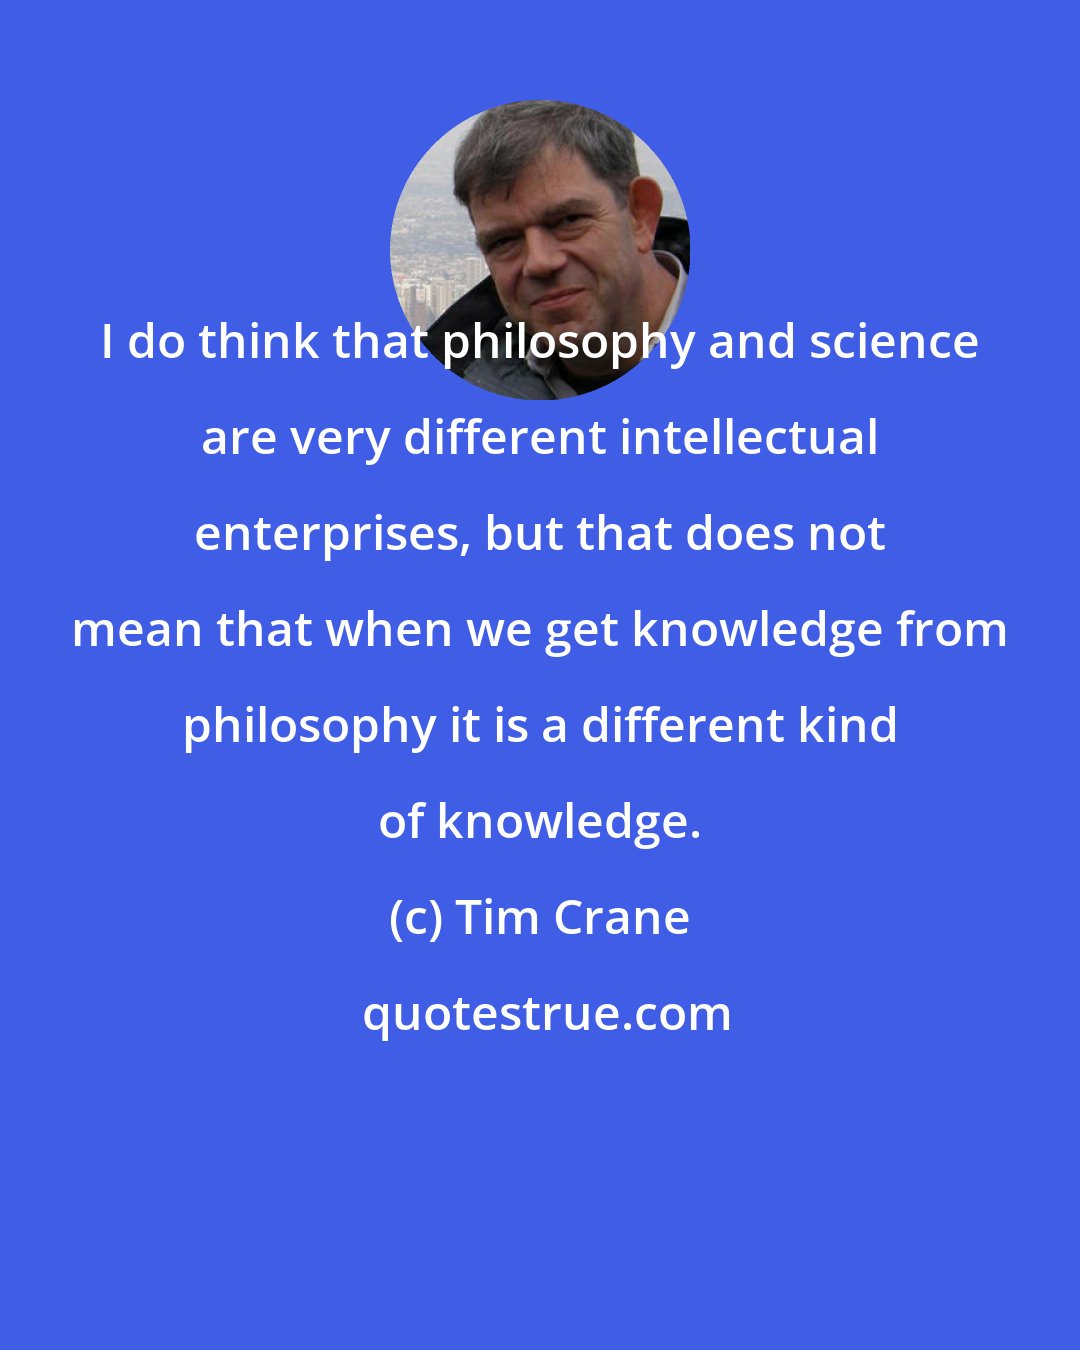 Tim Crane: I do think that philosophy and science are very different intellectual enterprises, but that does not mean that when we get knowledge from philosophy it is a different kind of knowledge.